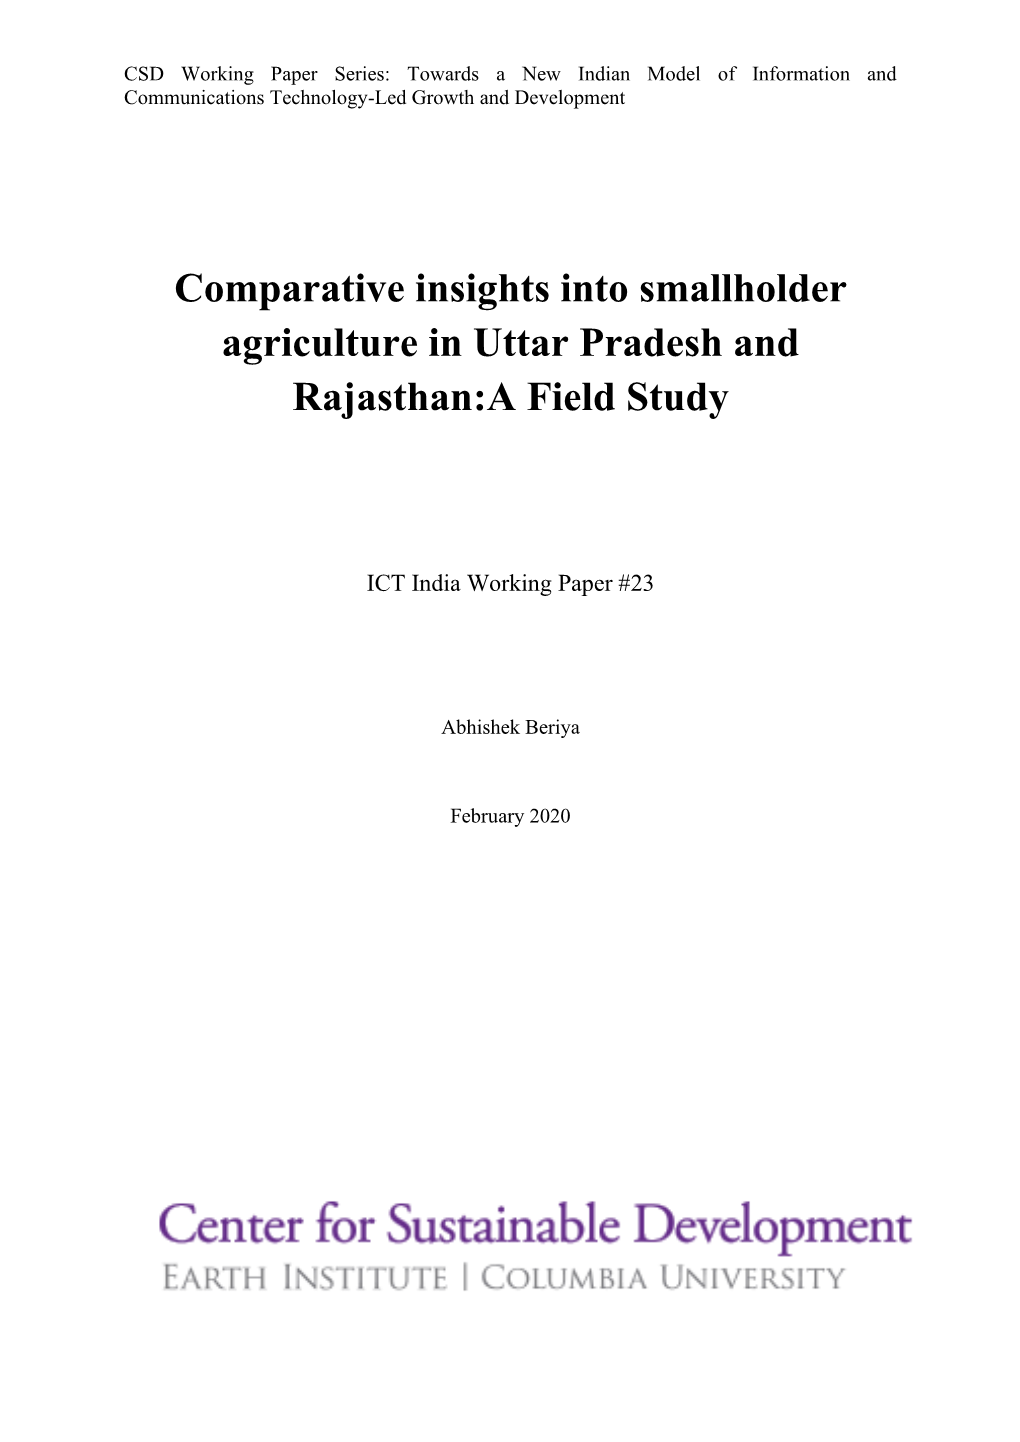 Comparative Insights Into Smallholder Agriculture in Uttar Pradesh and Rajasthan:A Field Study